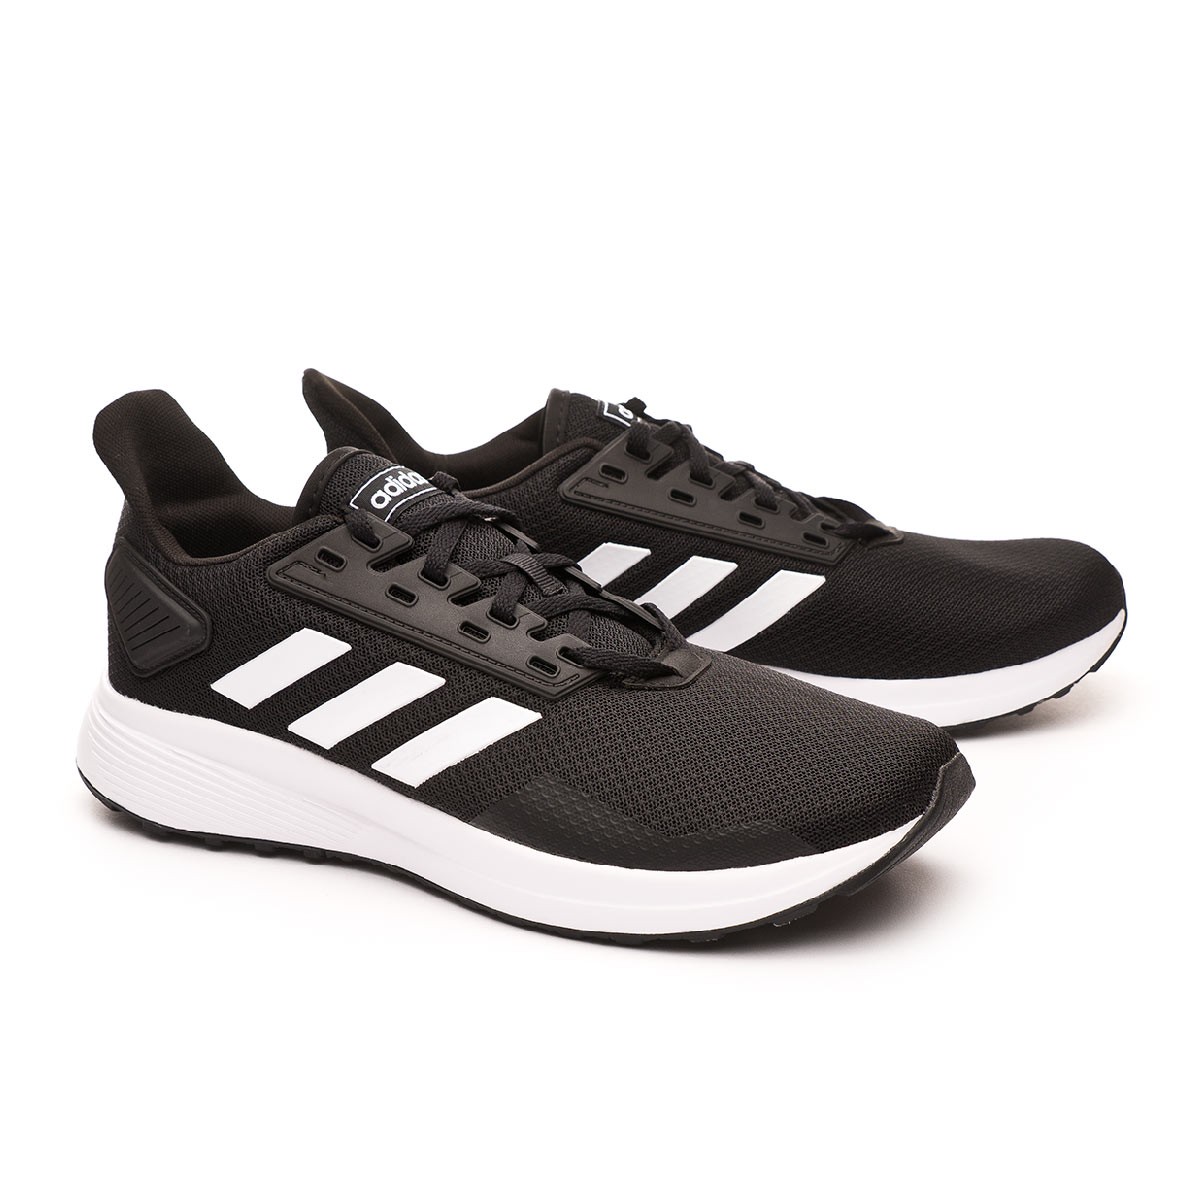 adidas core black trainers